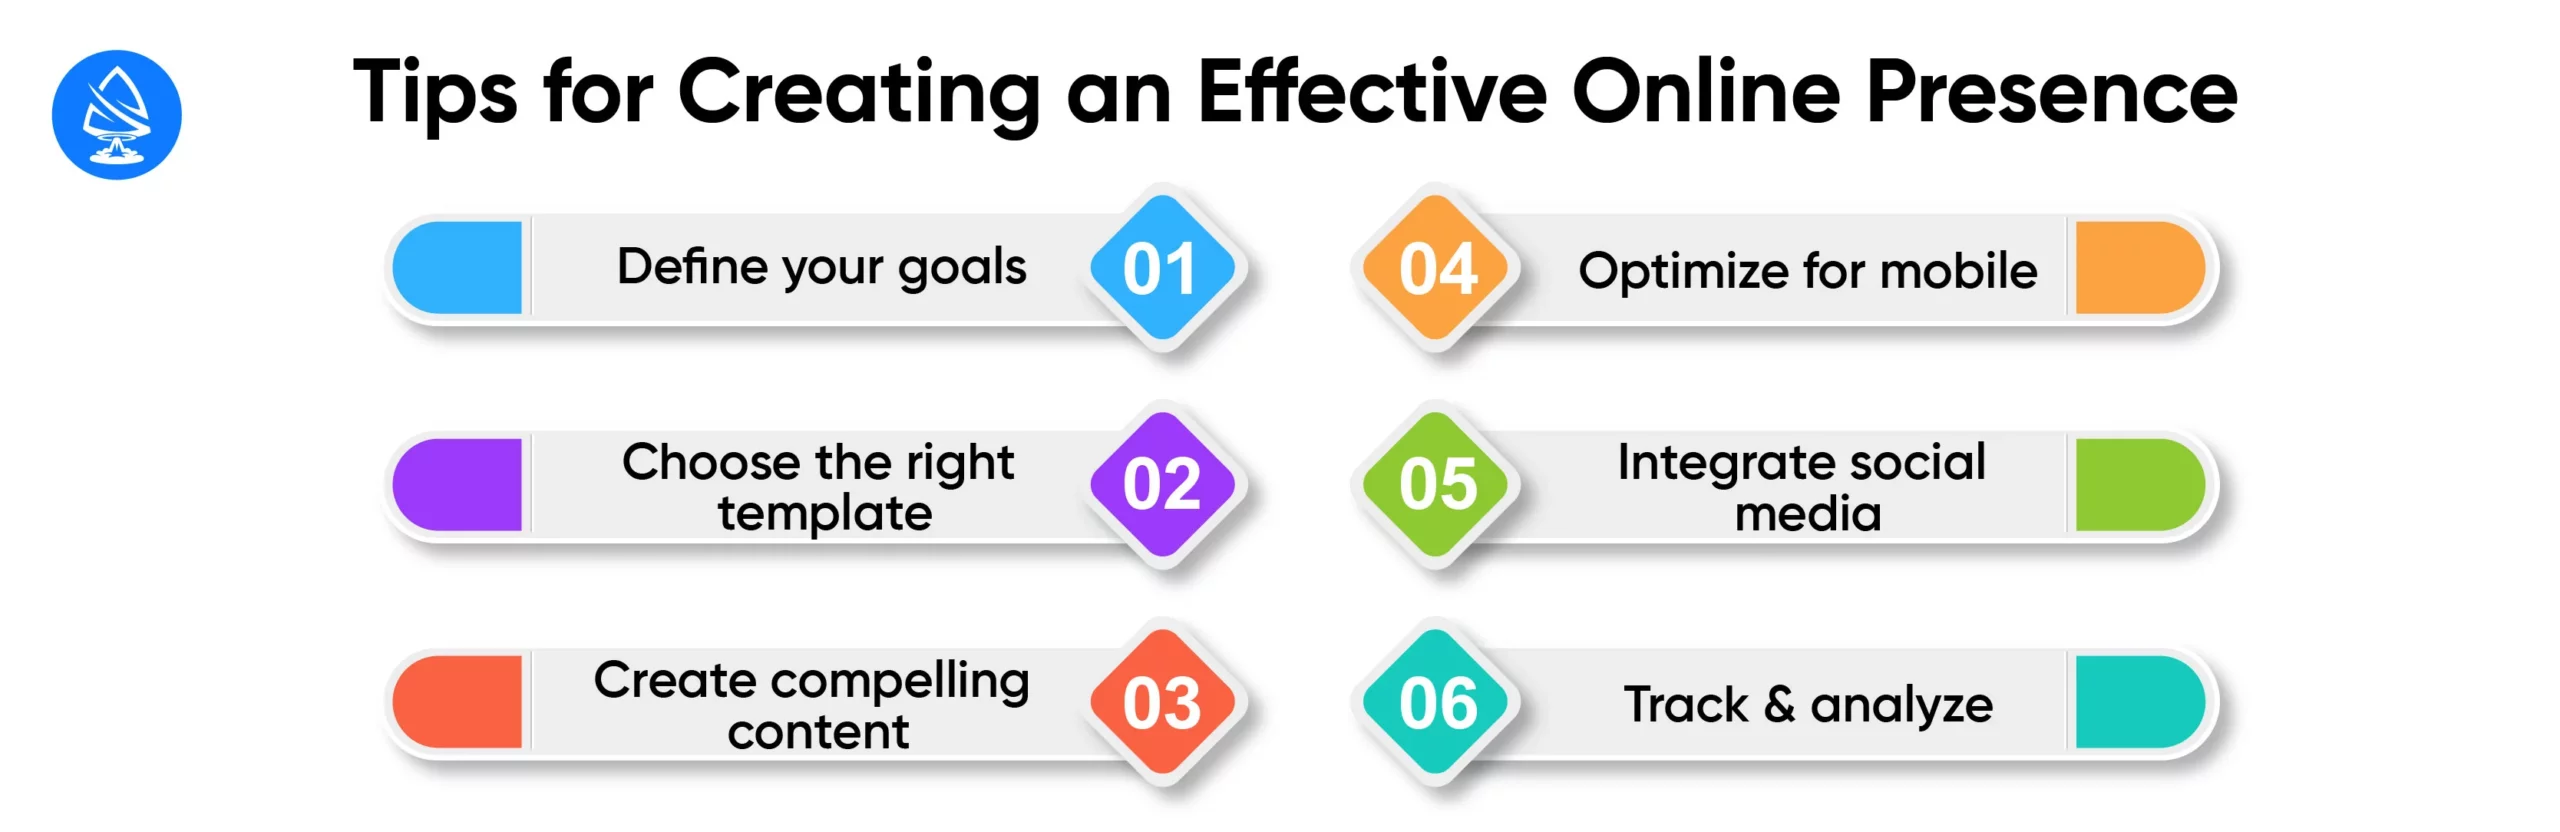 Tips for Creating an Effective Online Presence 